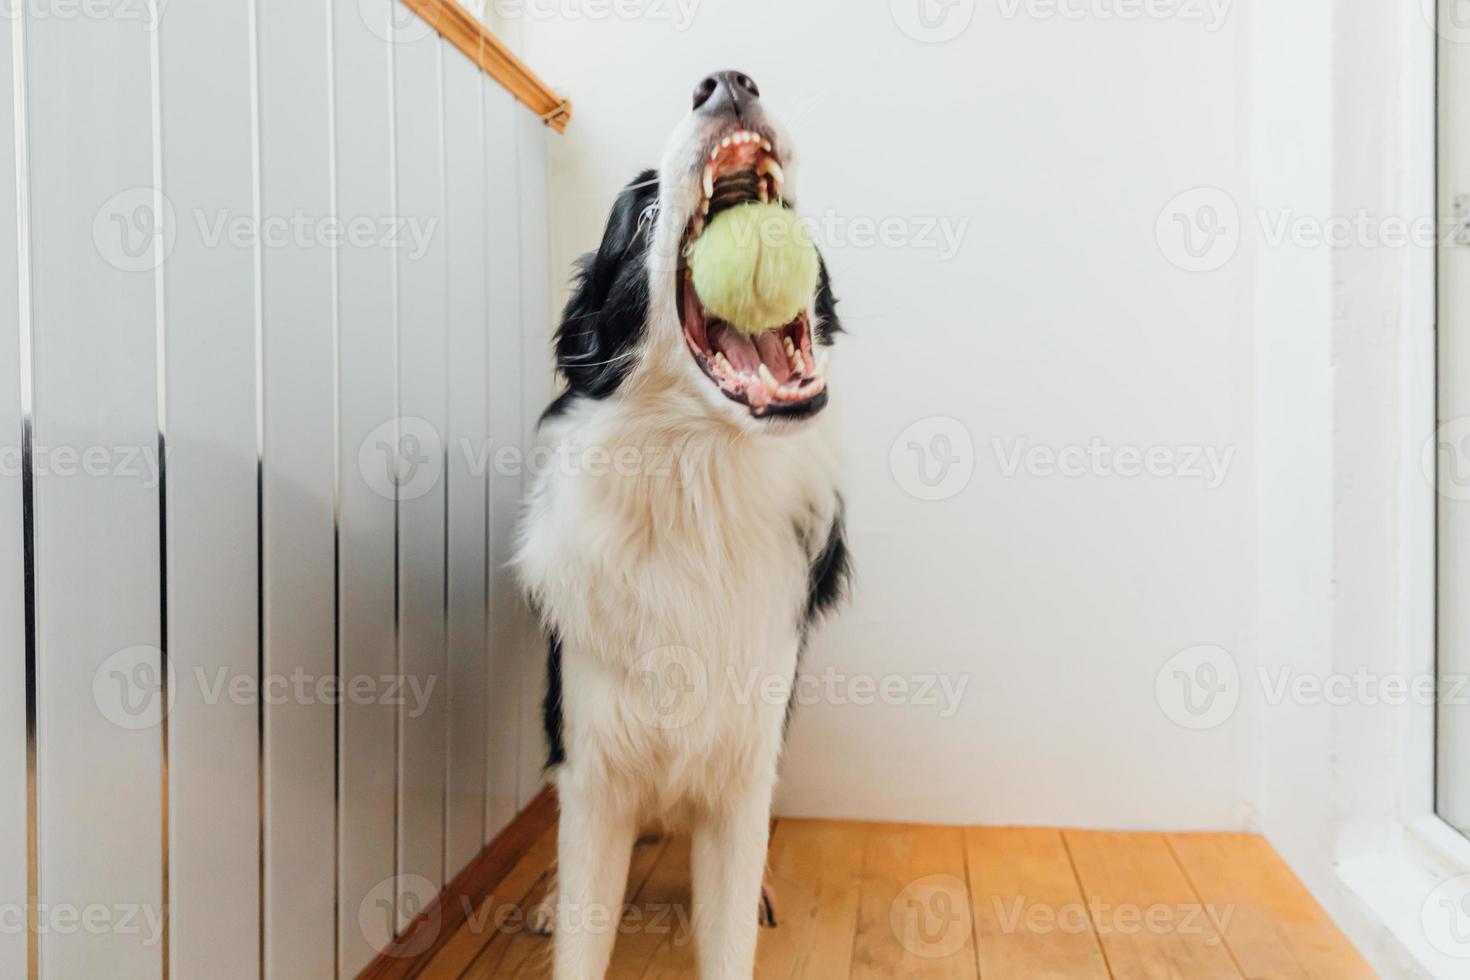 Funny portrait of cute smiling puppy dog border collie holding toy ball in mouth. New lovely member of family little dog at home playing with owner. Pet activity and games at home concept. photo